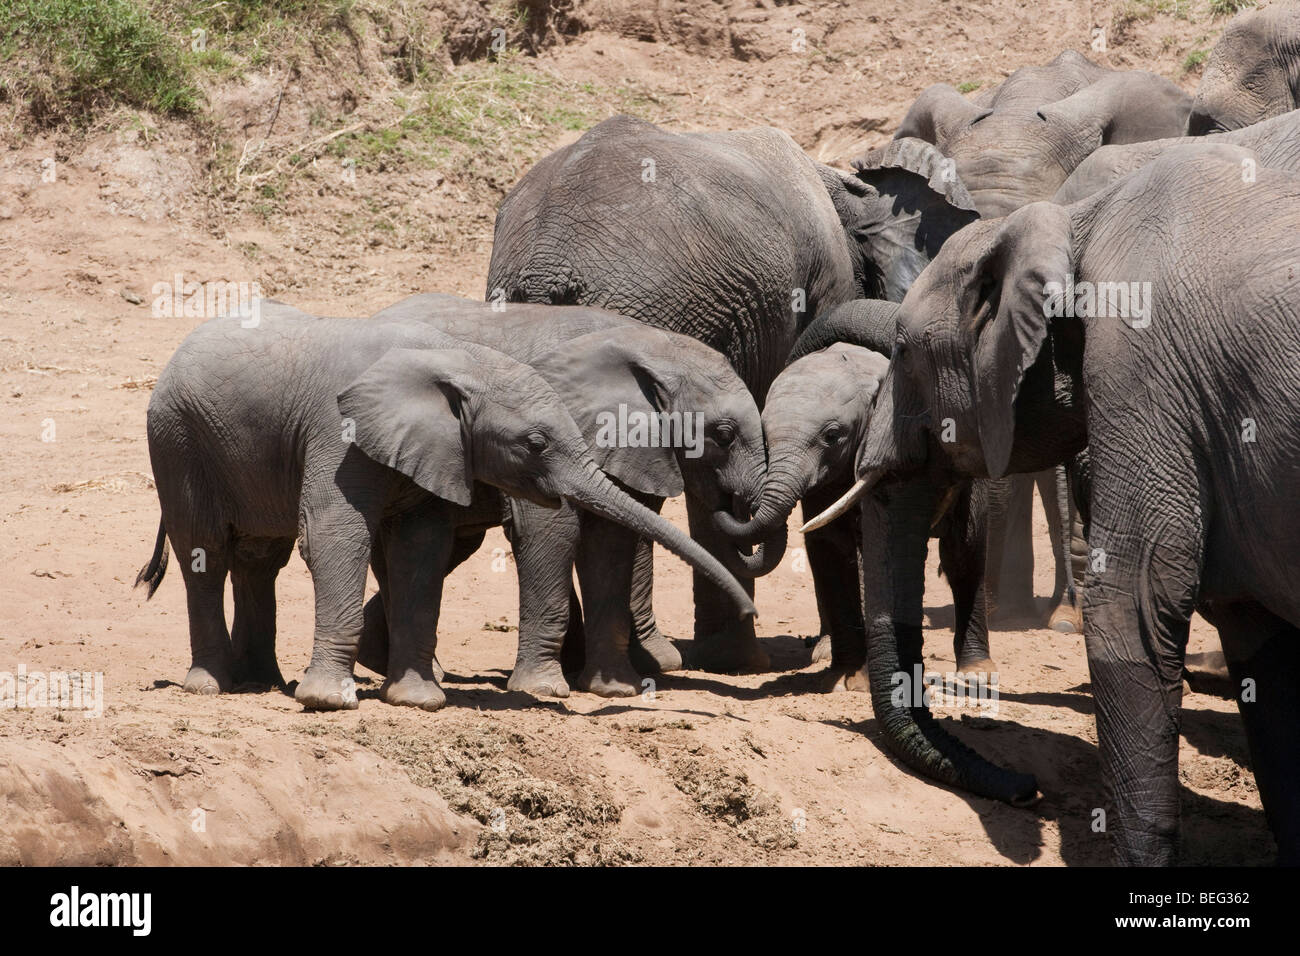 3 cute baby African elephants playing together heads together trunks touching talking, mother elephant watching close up landscape Masai Mara Kenya Stock Photo